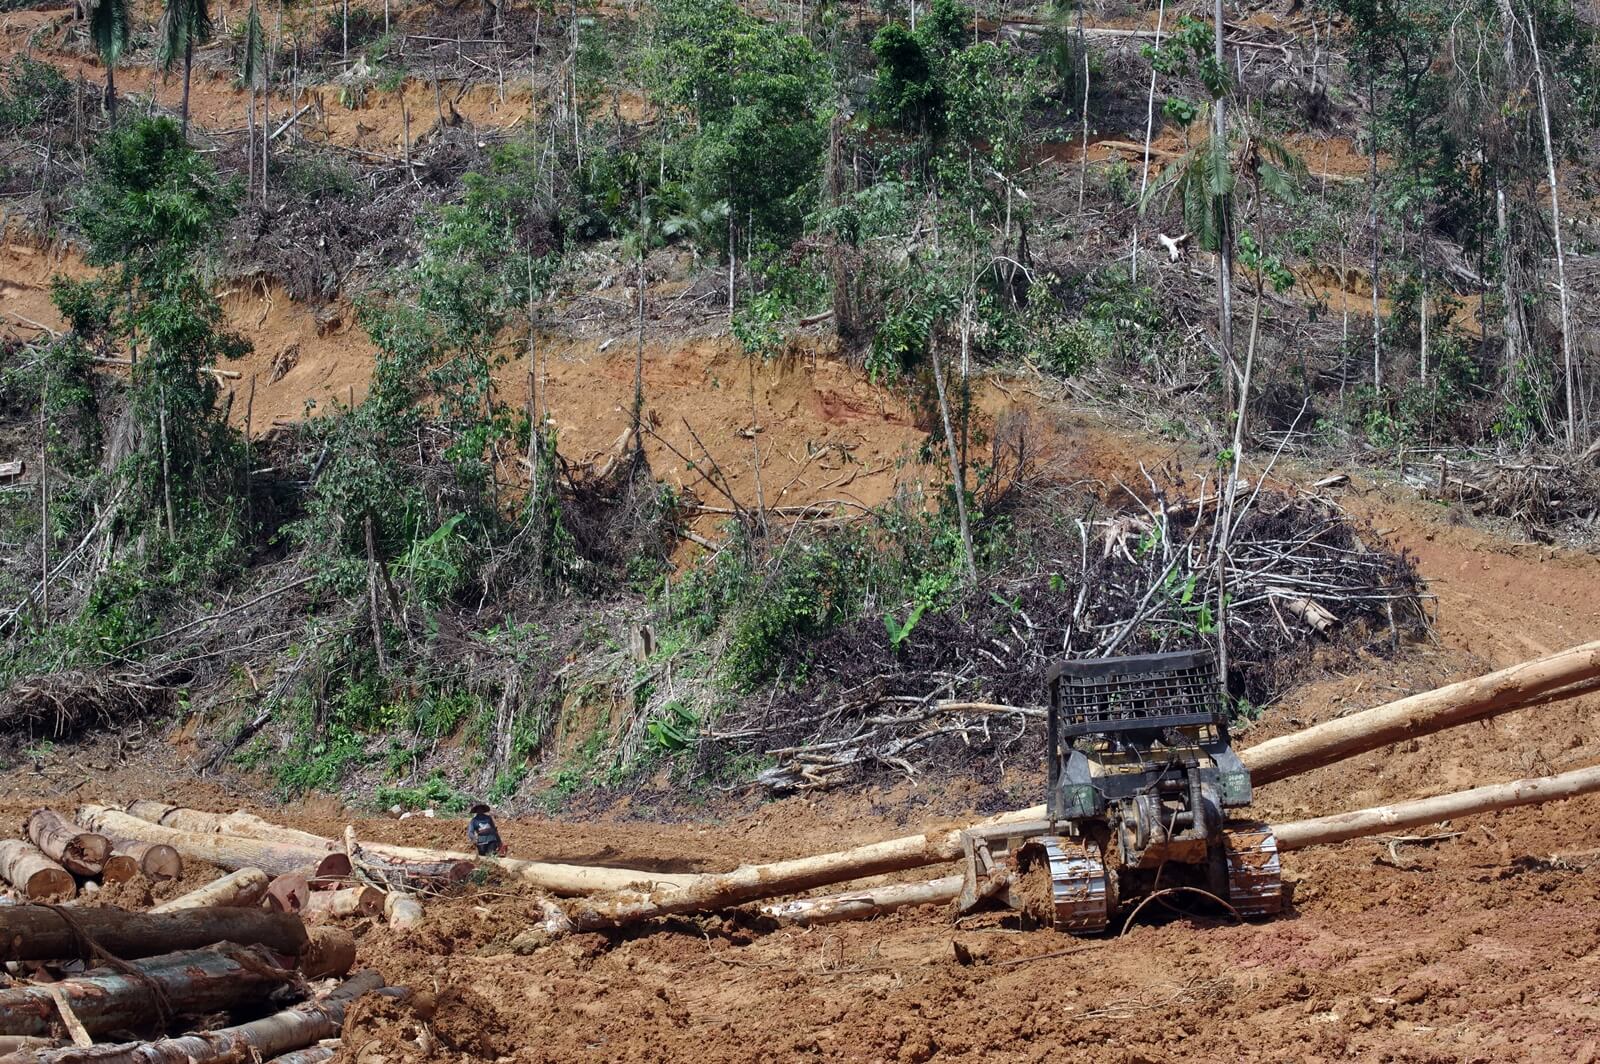 A bulldozer clearing a forest reserve approved for forest plantation. But most of such areas across Peninsular Malaysia have not been replanted after the natural forests were removed. (YH Law)